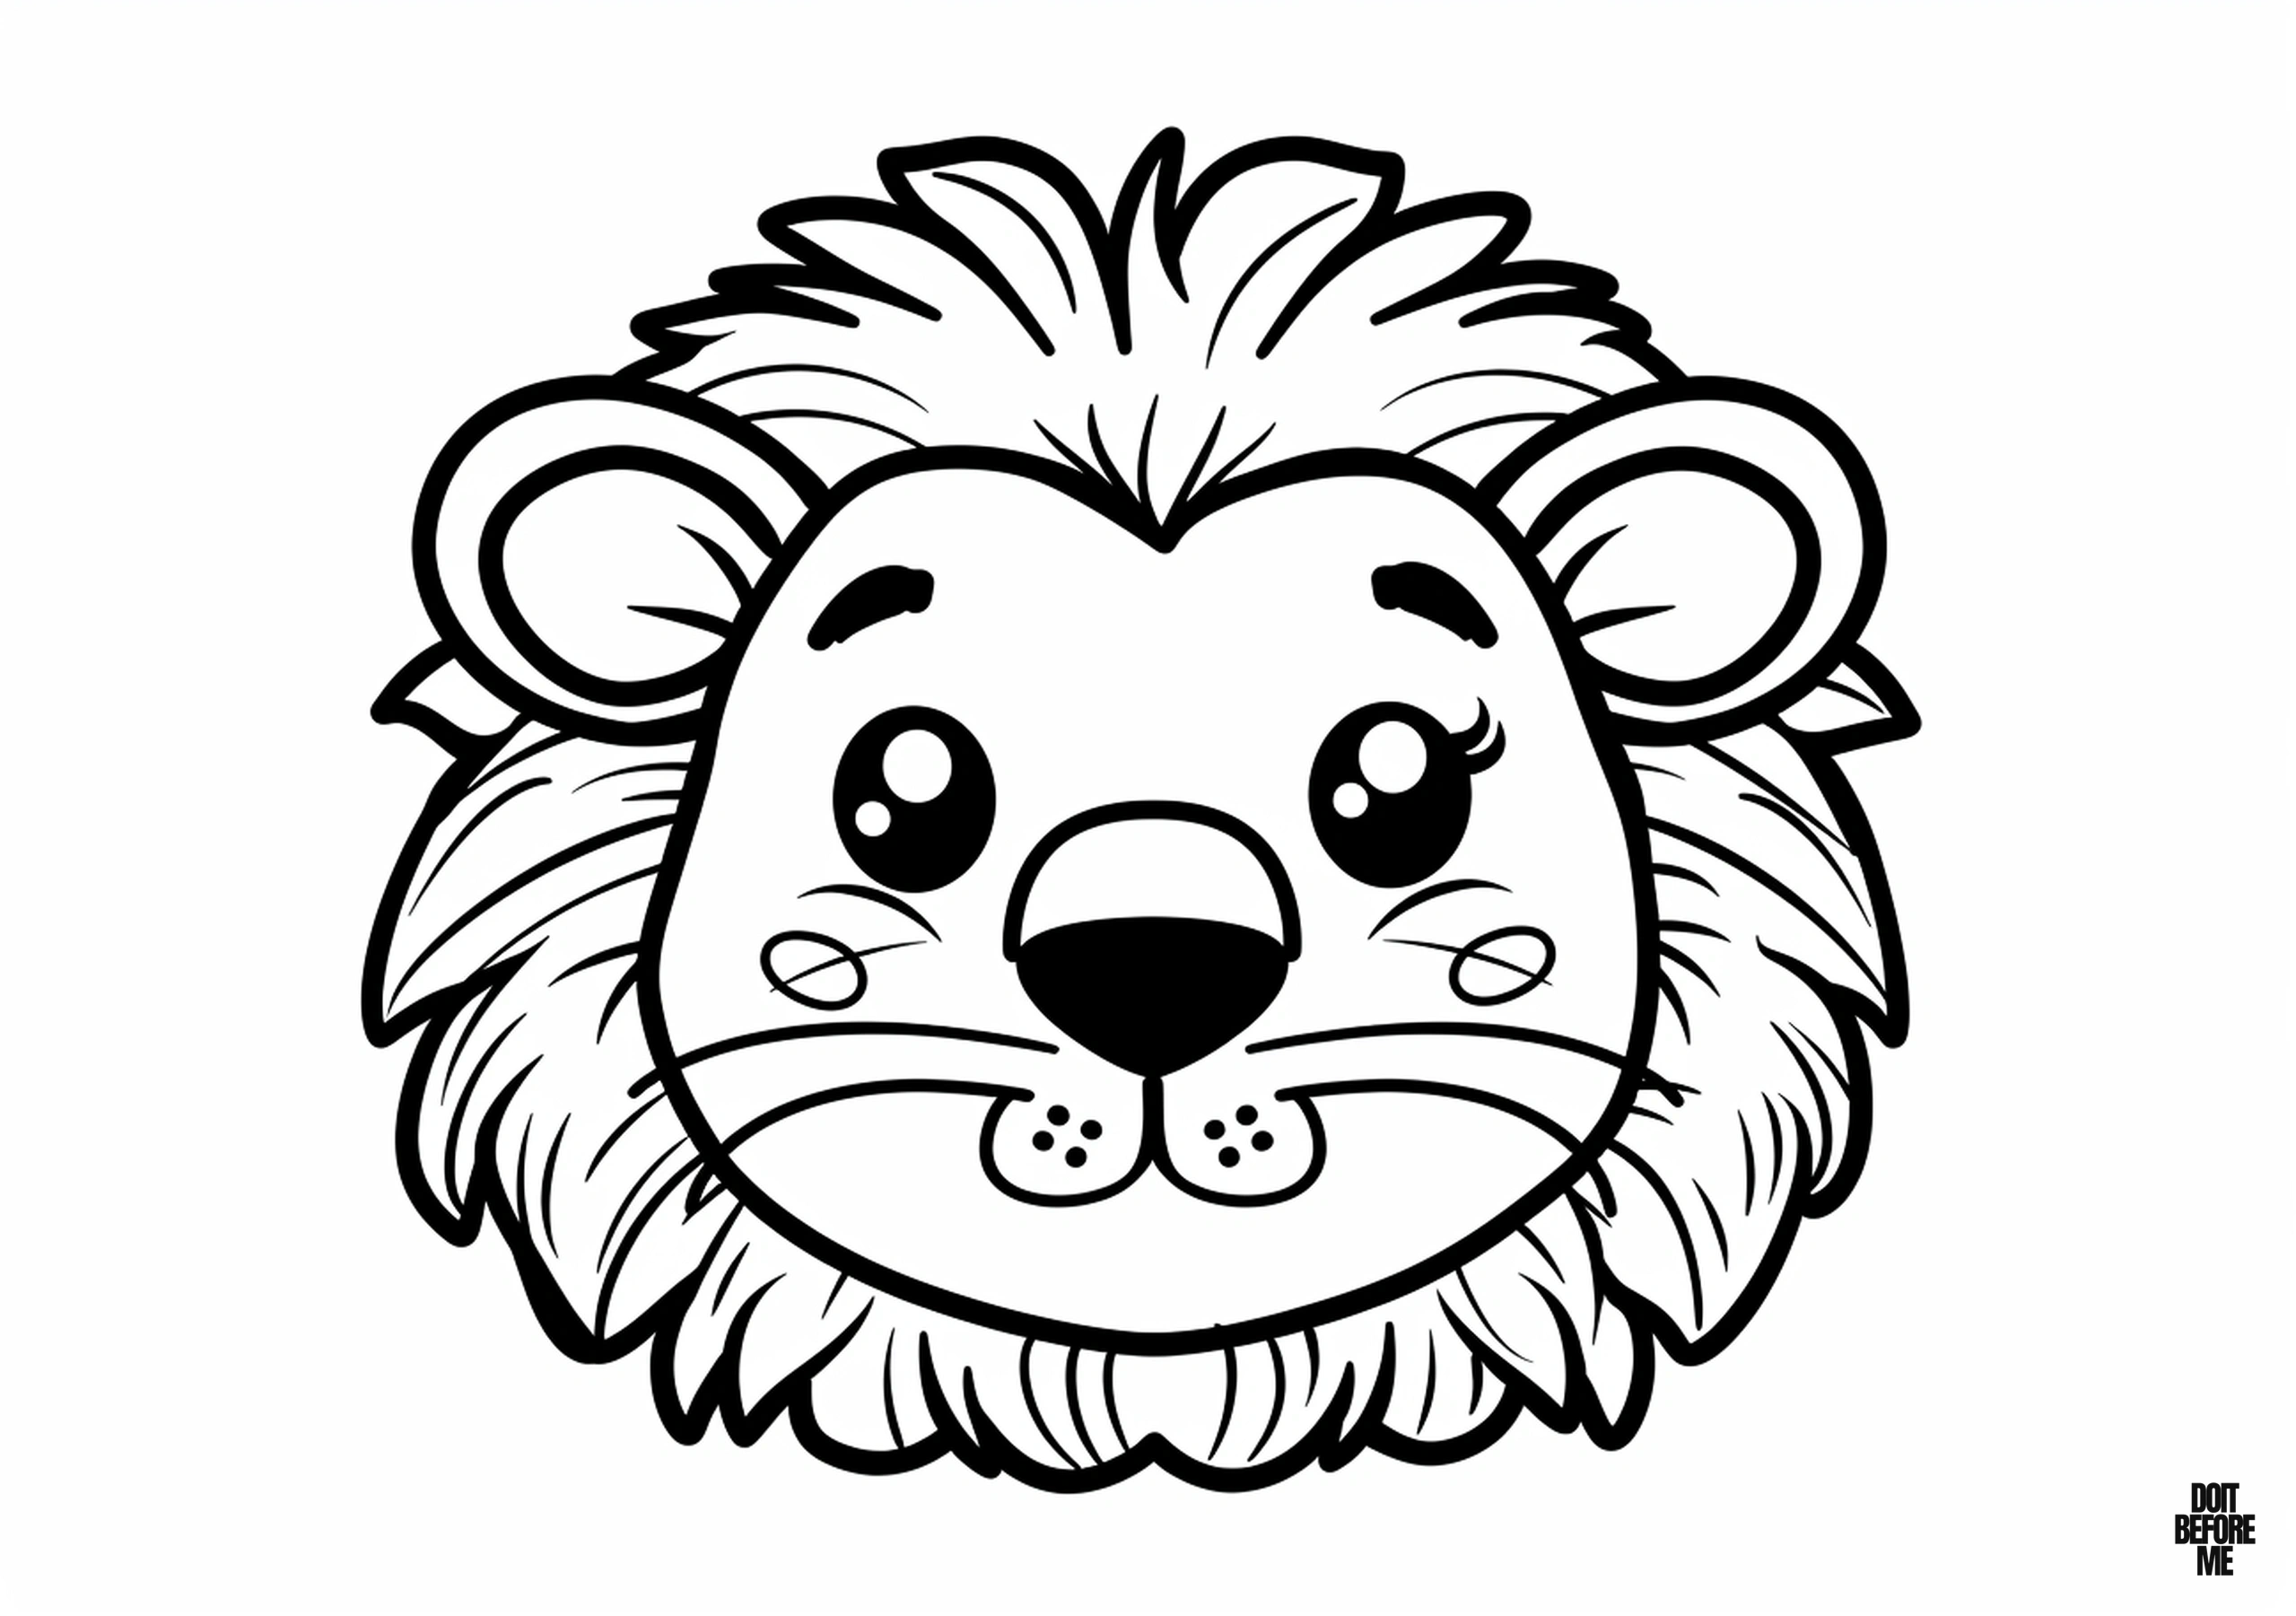 Printable coloring page featuring a smiling male baby lion face, designed for preschool-aged kids.